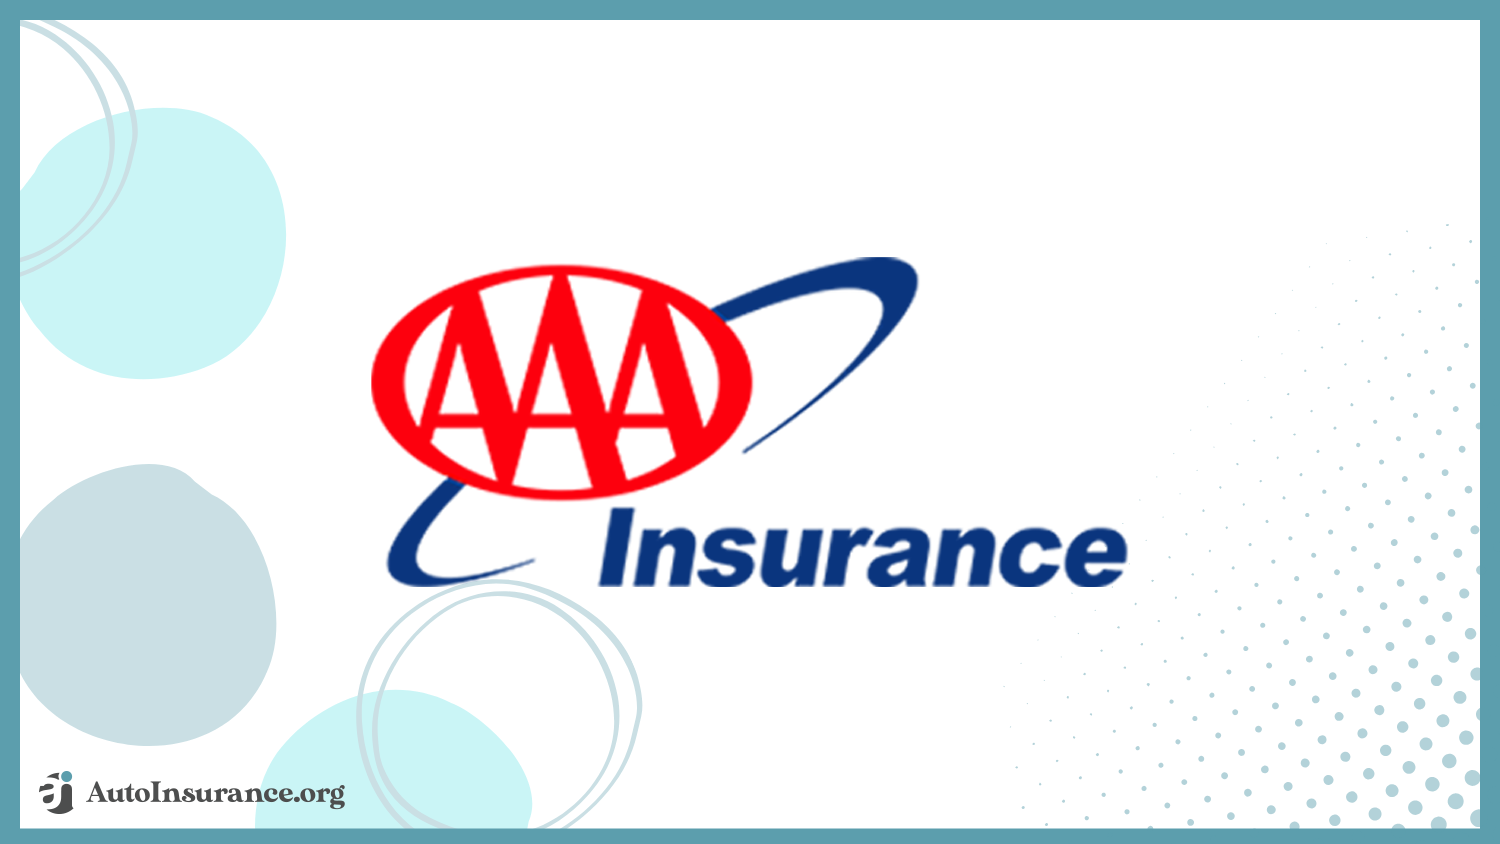 AAA: Best Auto Insurance for Drivers with Dementia